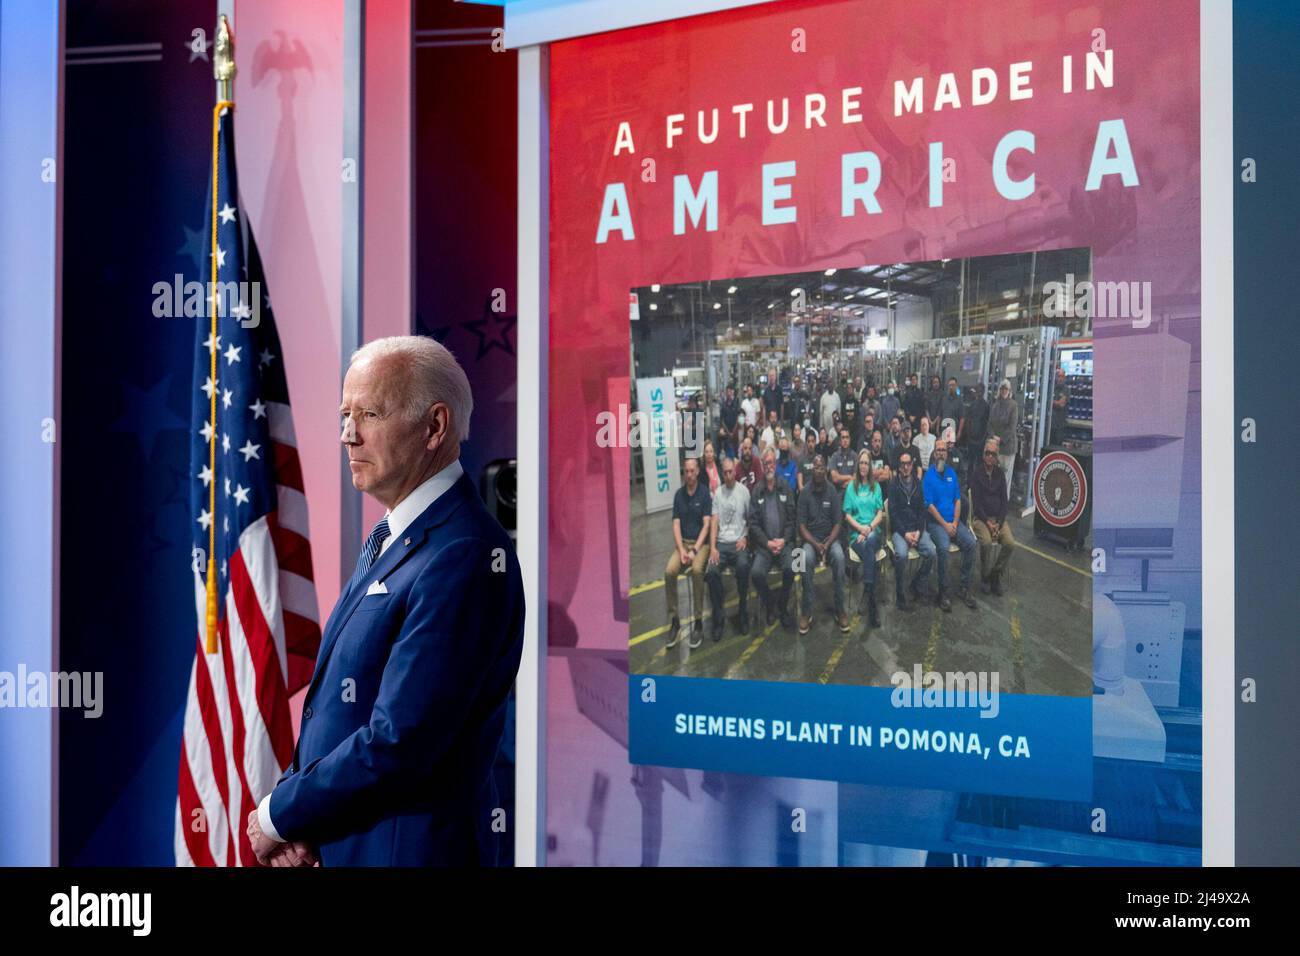 President Joe Biden delivers remarks at an announcement with Siemens on a “Future Made in America”, Friday, March 4, 2022, in the South Court Auditorium of the Eisenhower Executive Office Building at the White House. (Official White House Photo by Erin Scott) Stock Photo